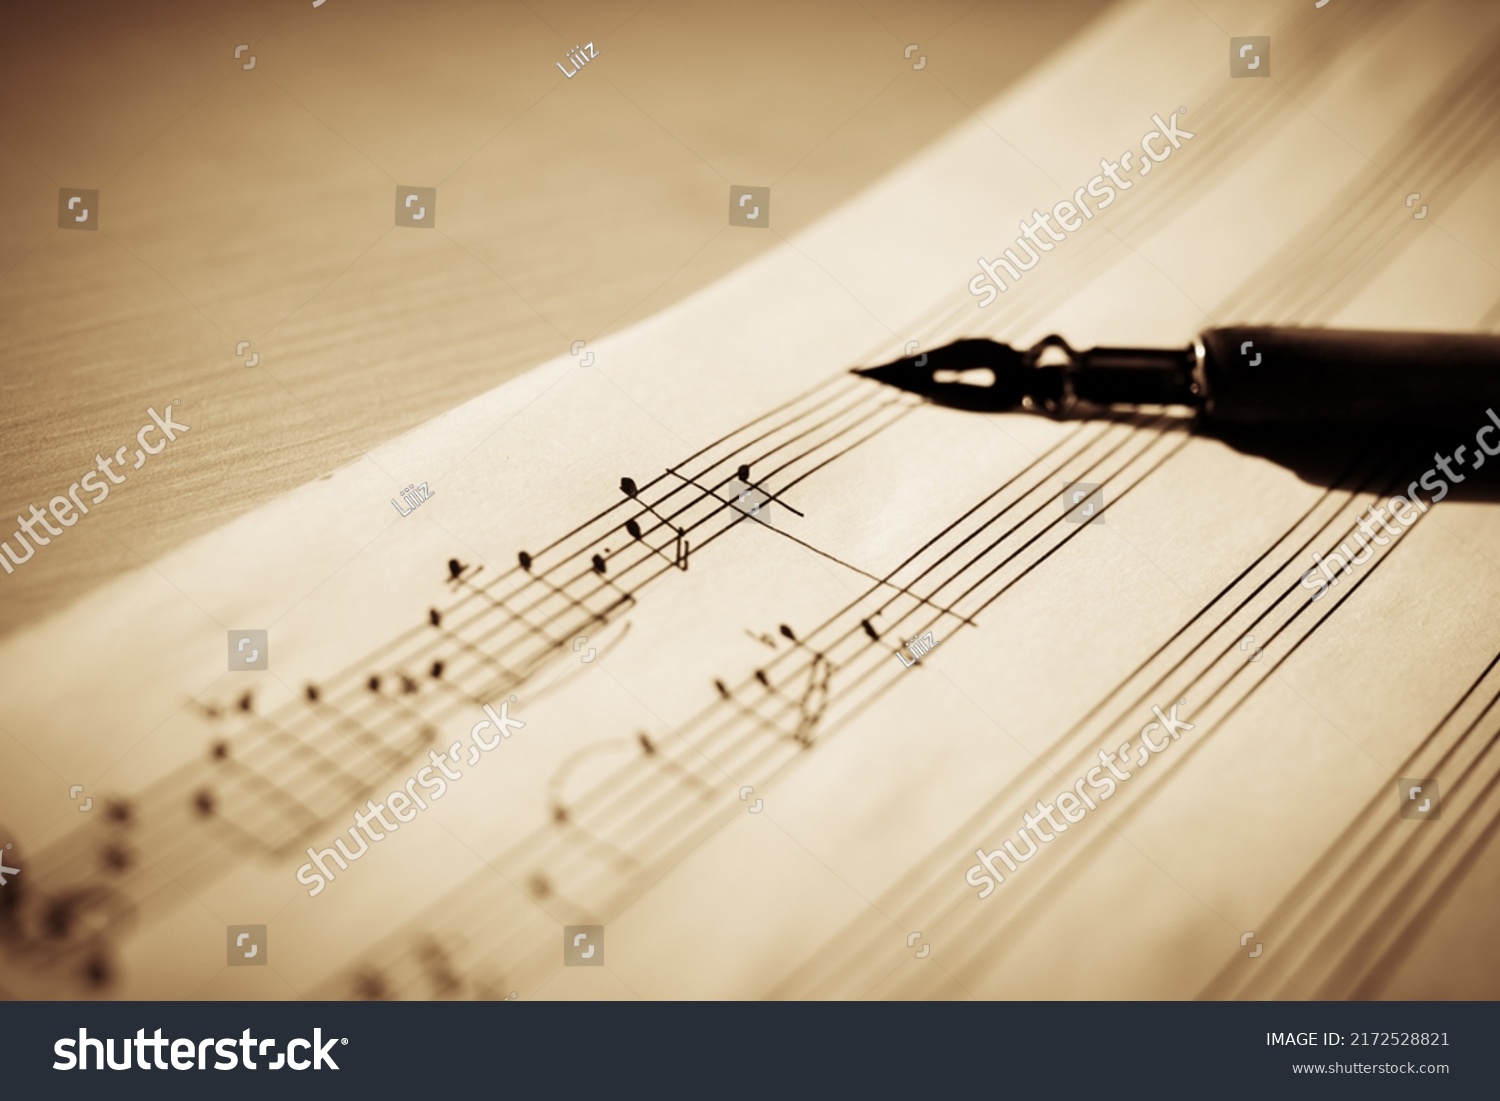 Sheet music on a sheet music stand with an ink pen in the background, macro notes, selective focus #2172528821